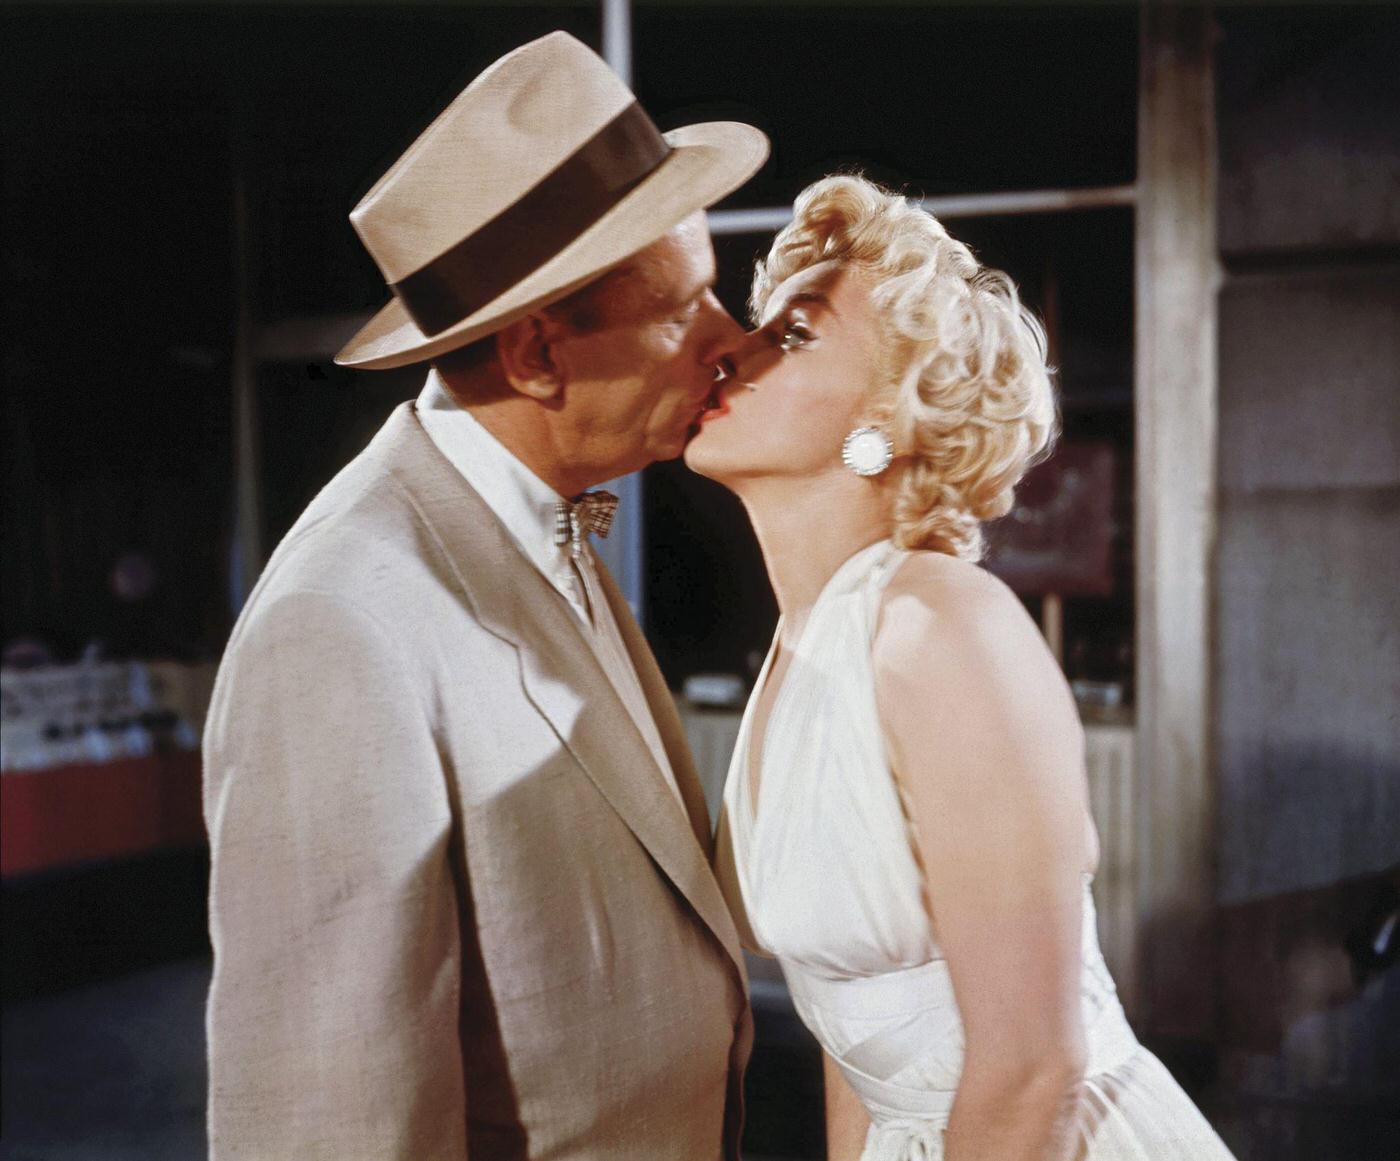 Marilyn Monroe kisses co-star Tom Ewell while wearing a white dress during the making of the famous skirt-blowing scene on set in 1954 during the filming of "The Seven Year Itch"